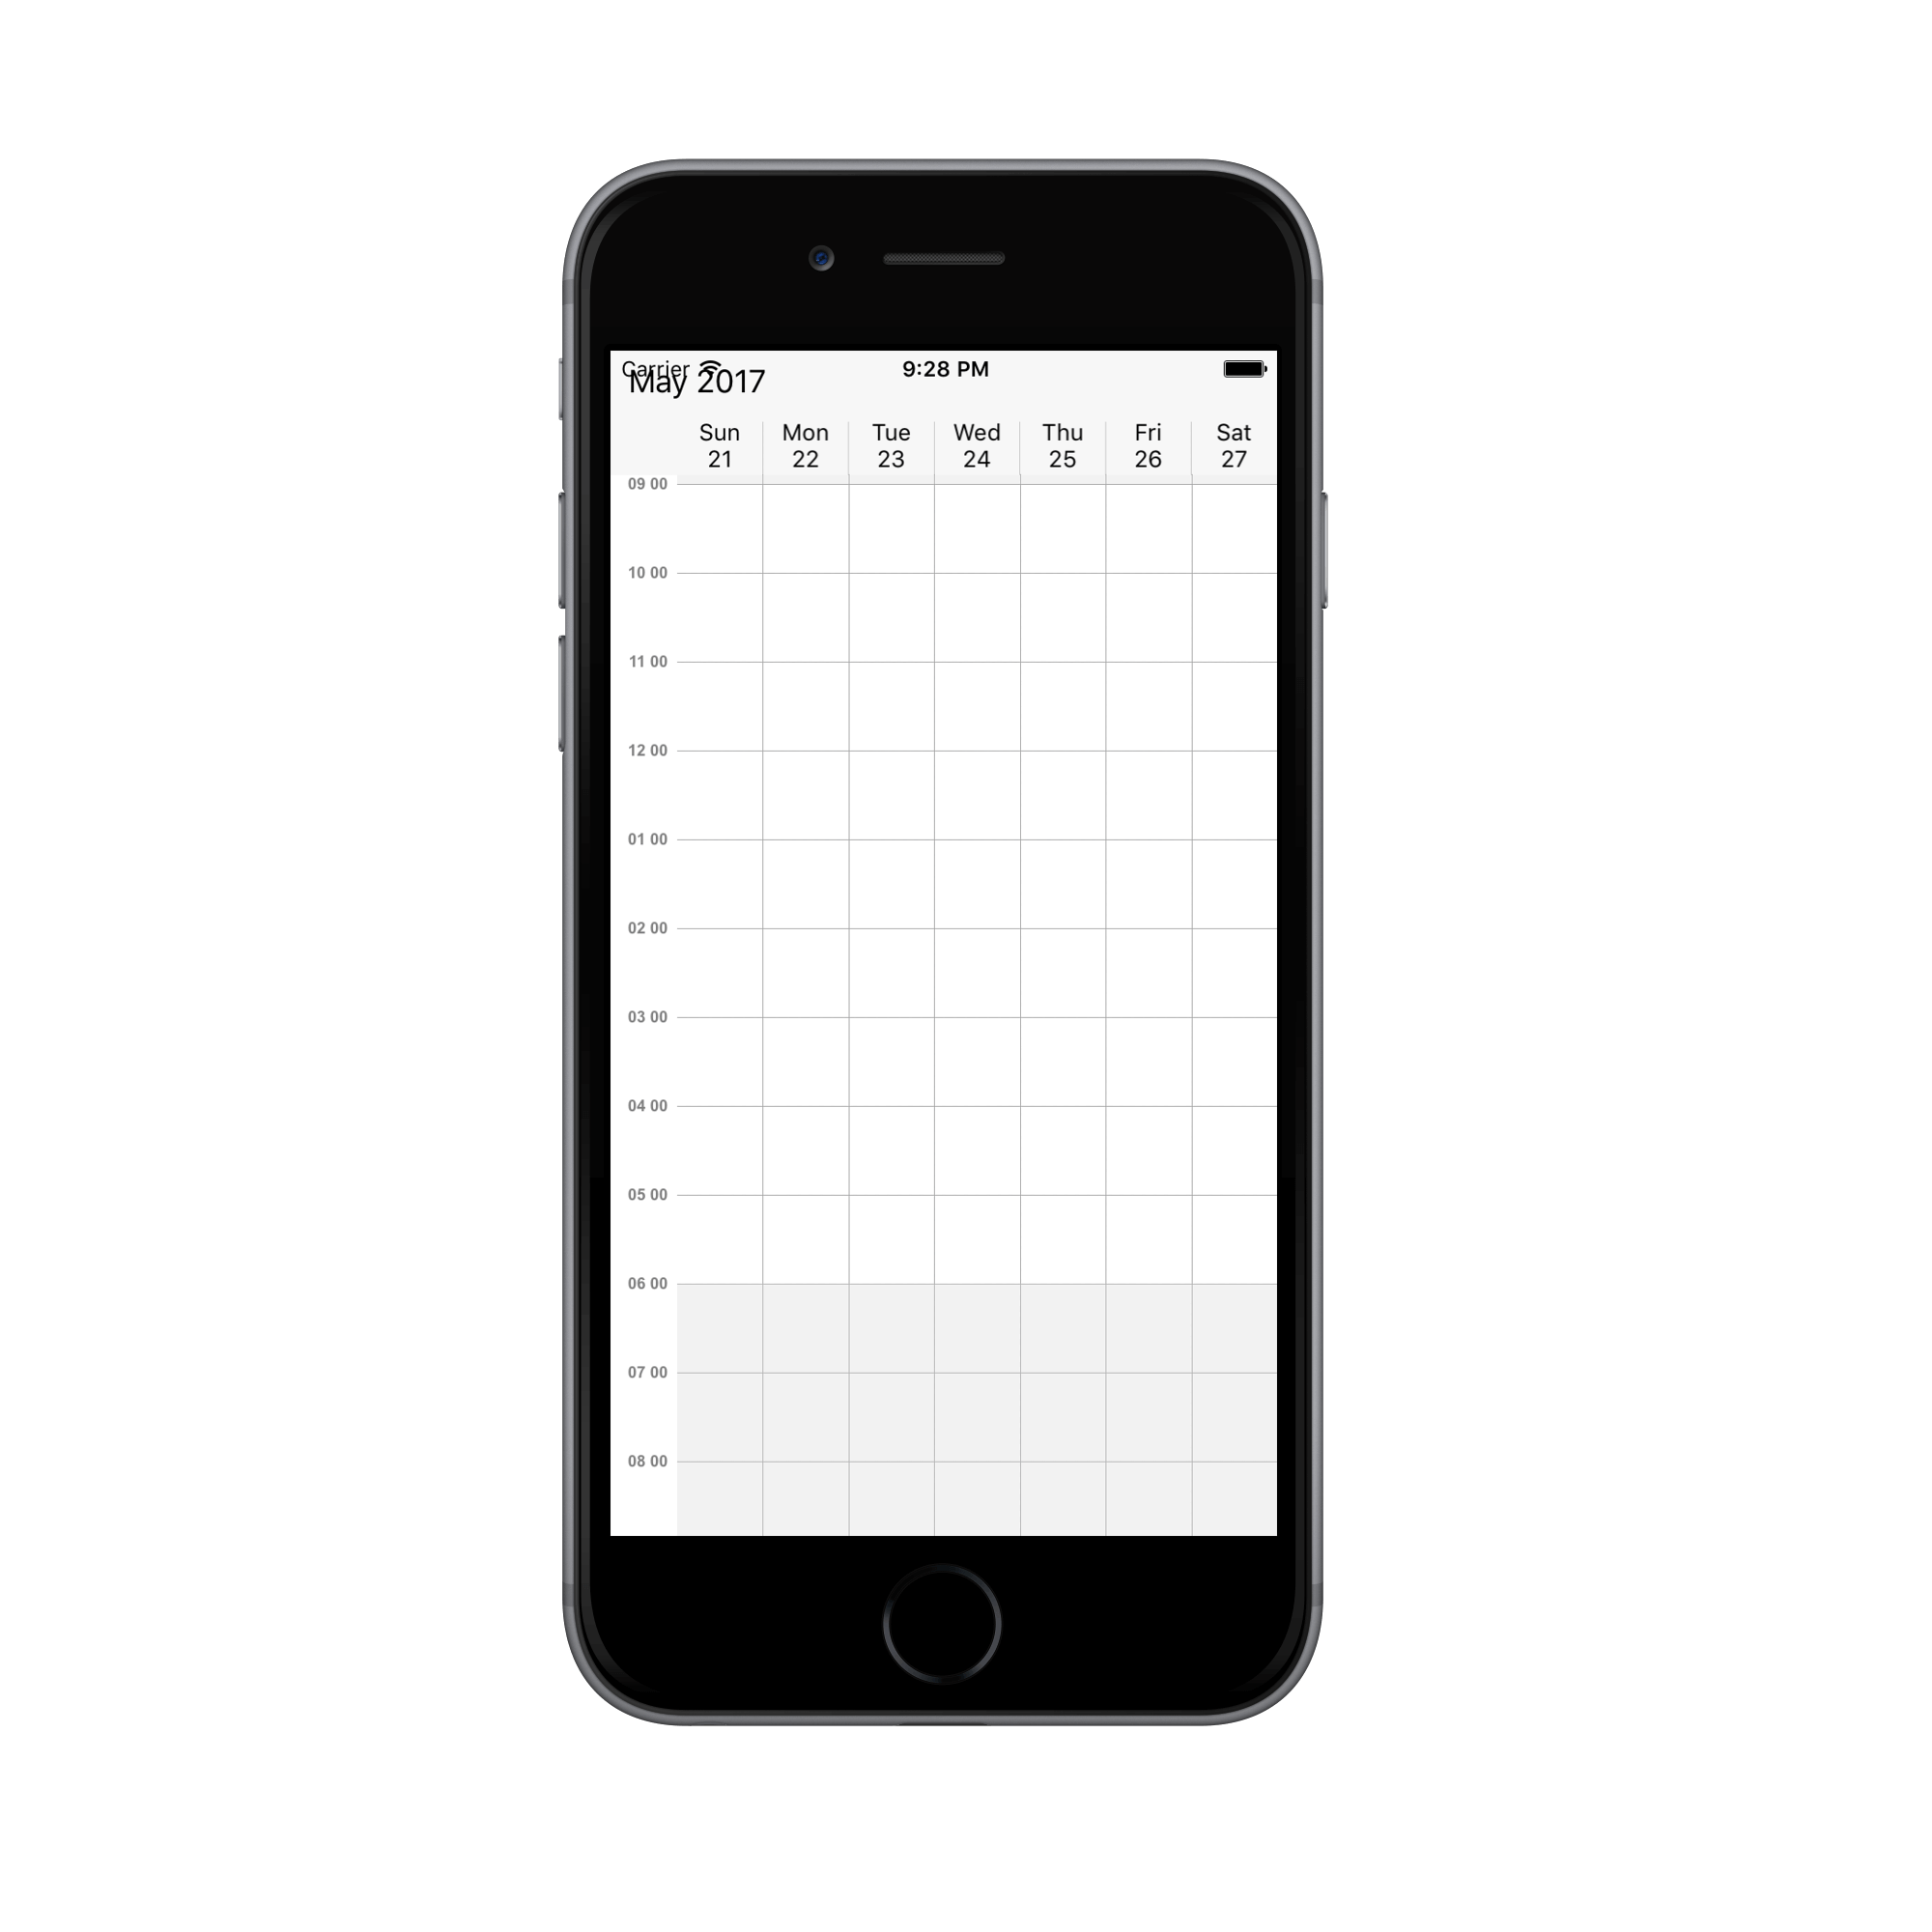 Week view time label customization for schedule in Xamarin.iOS